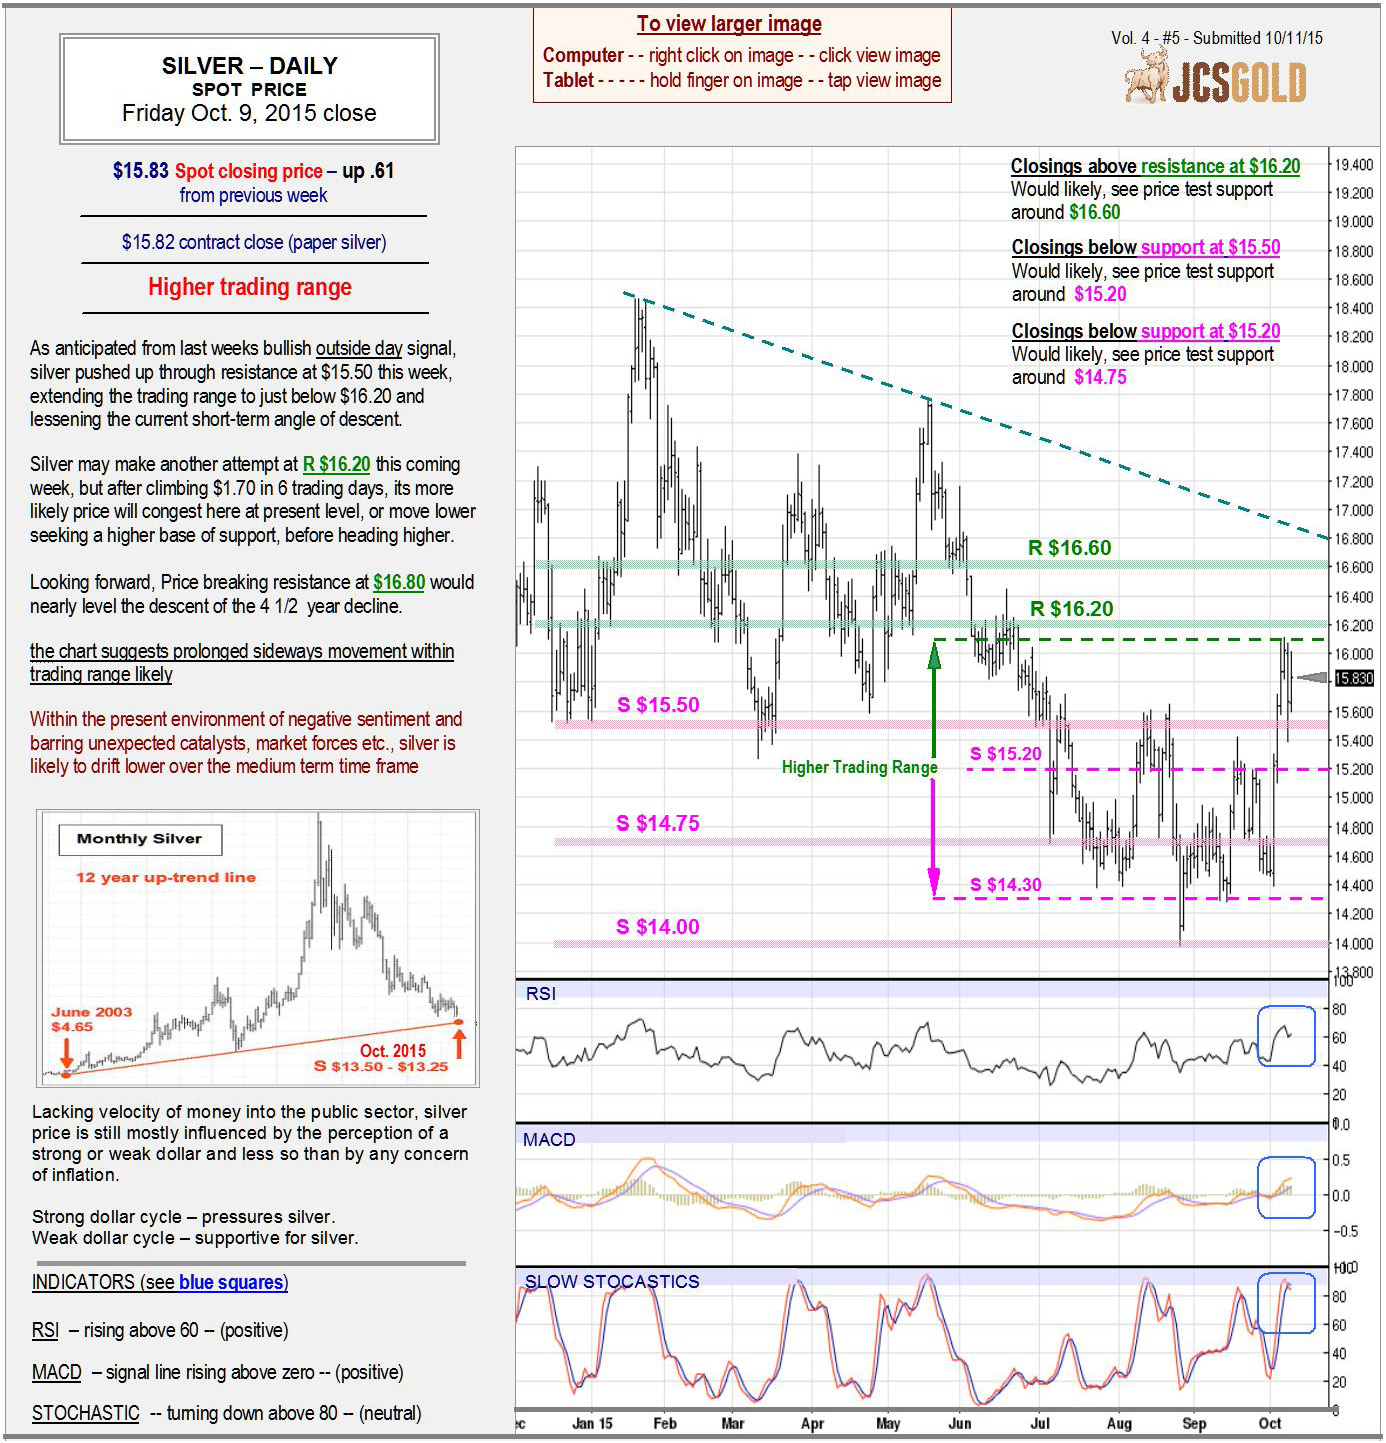 Oct 9, 2015 chart & commentary